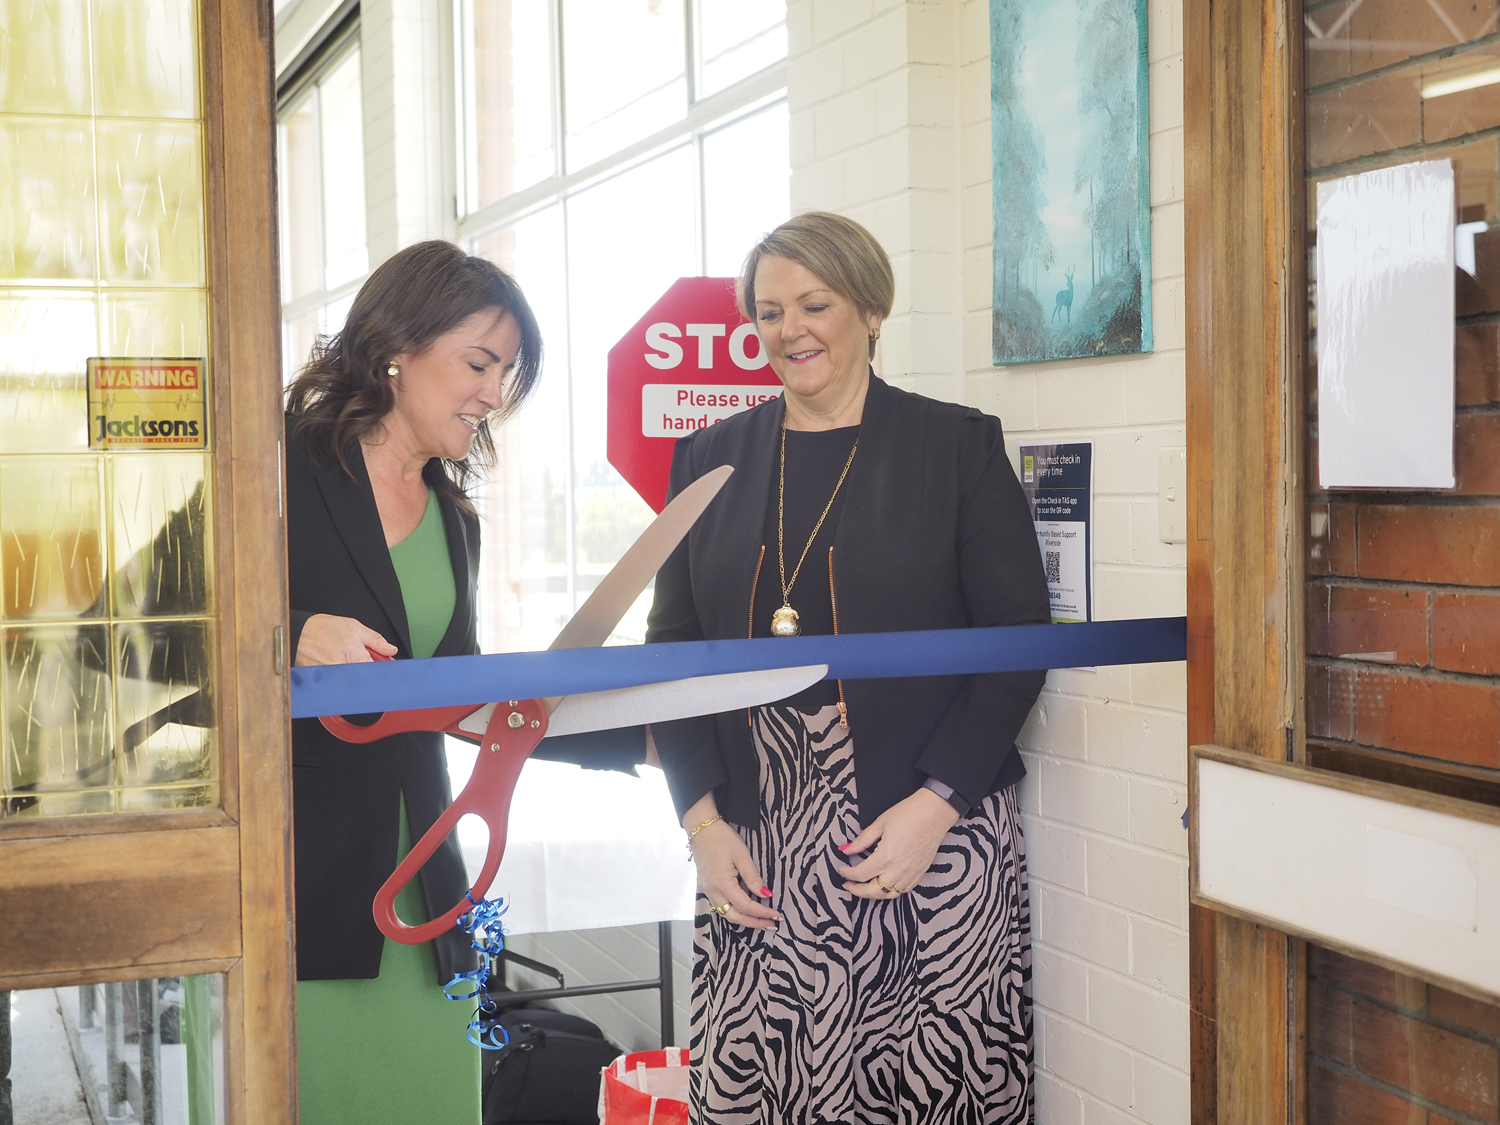 A woman cuts a blue ribbon over a doorway with a large scissors